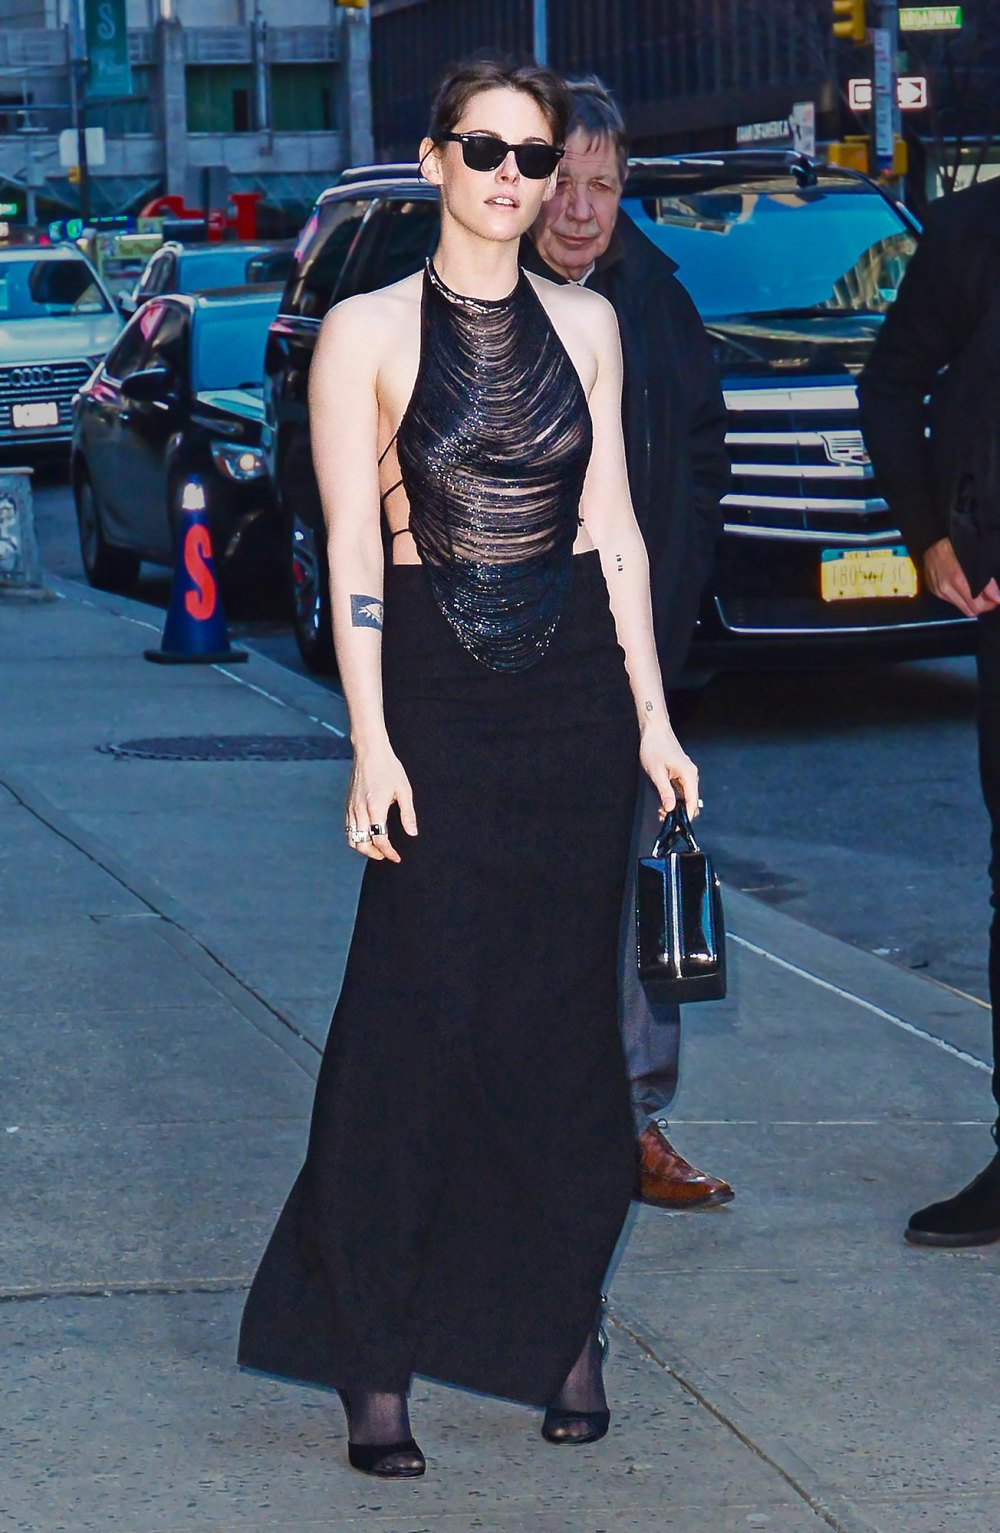 Kristen Stewart Goes Monochrome in Black Cut-Out Halter Top and Maxi Skirt in NYC